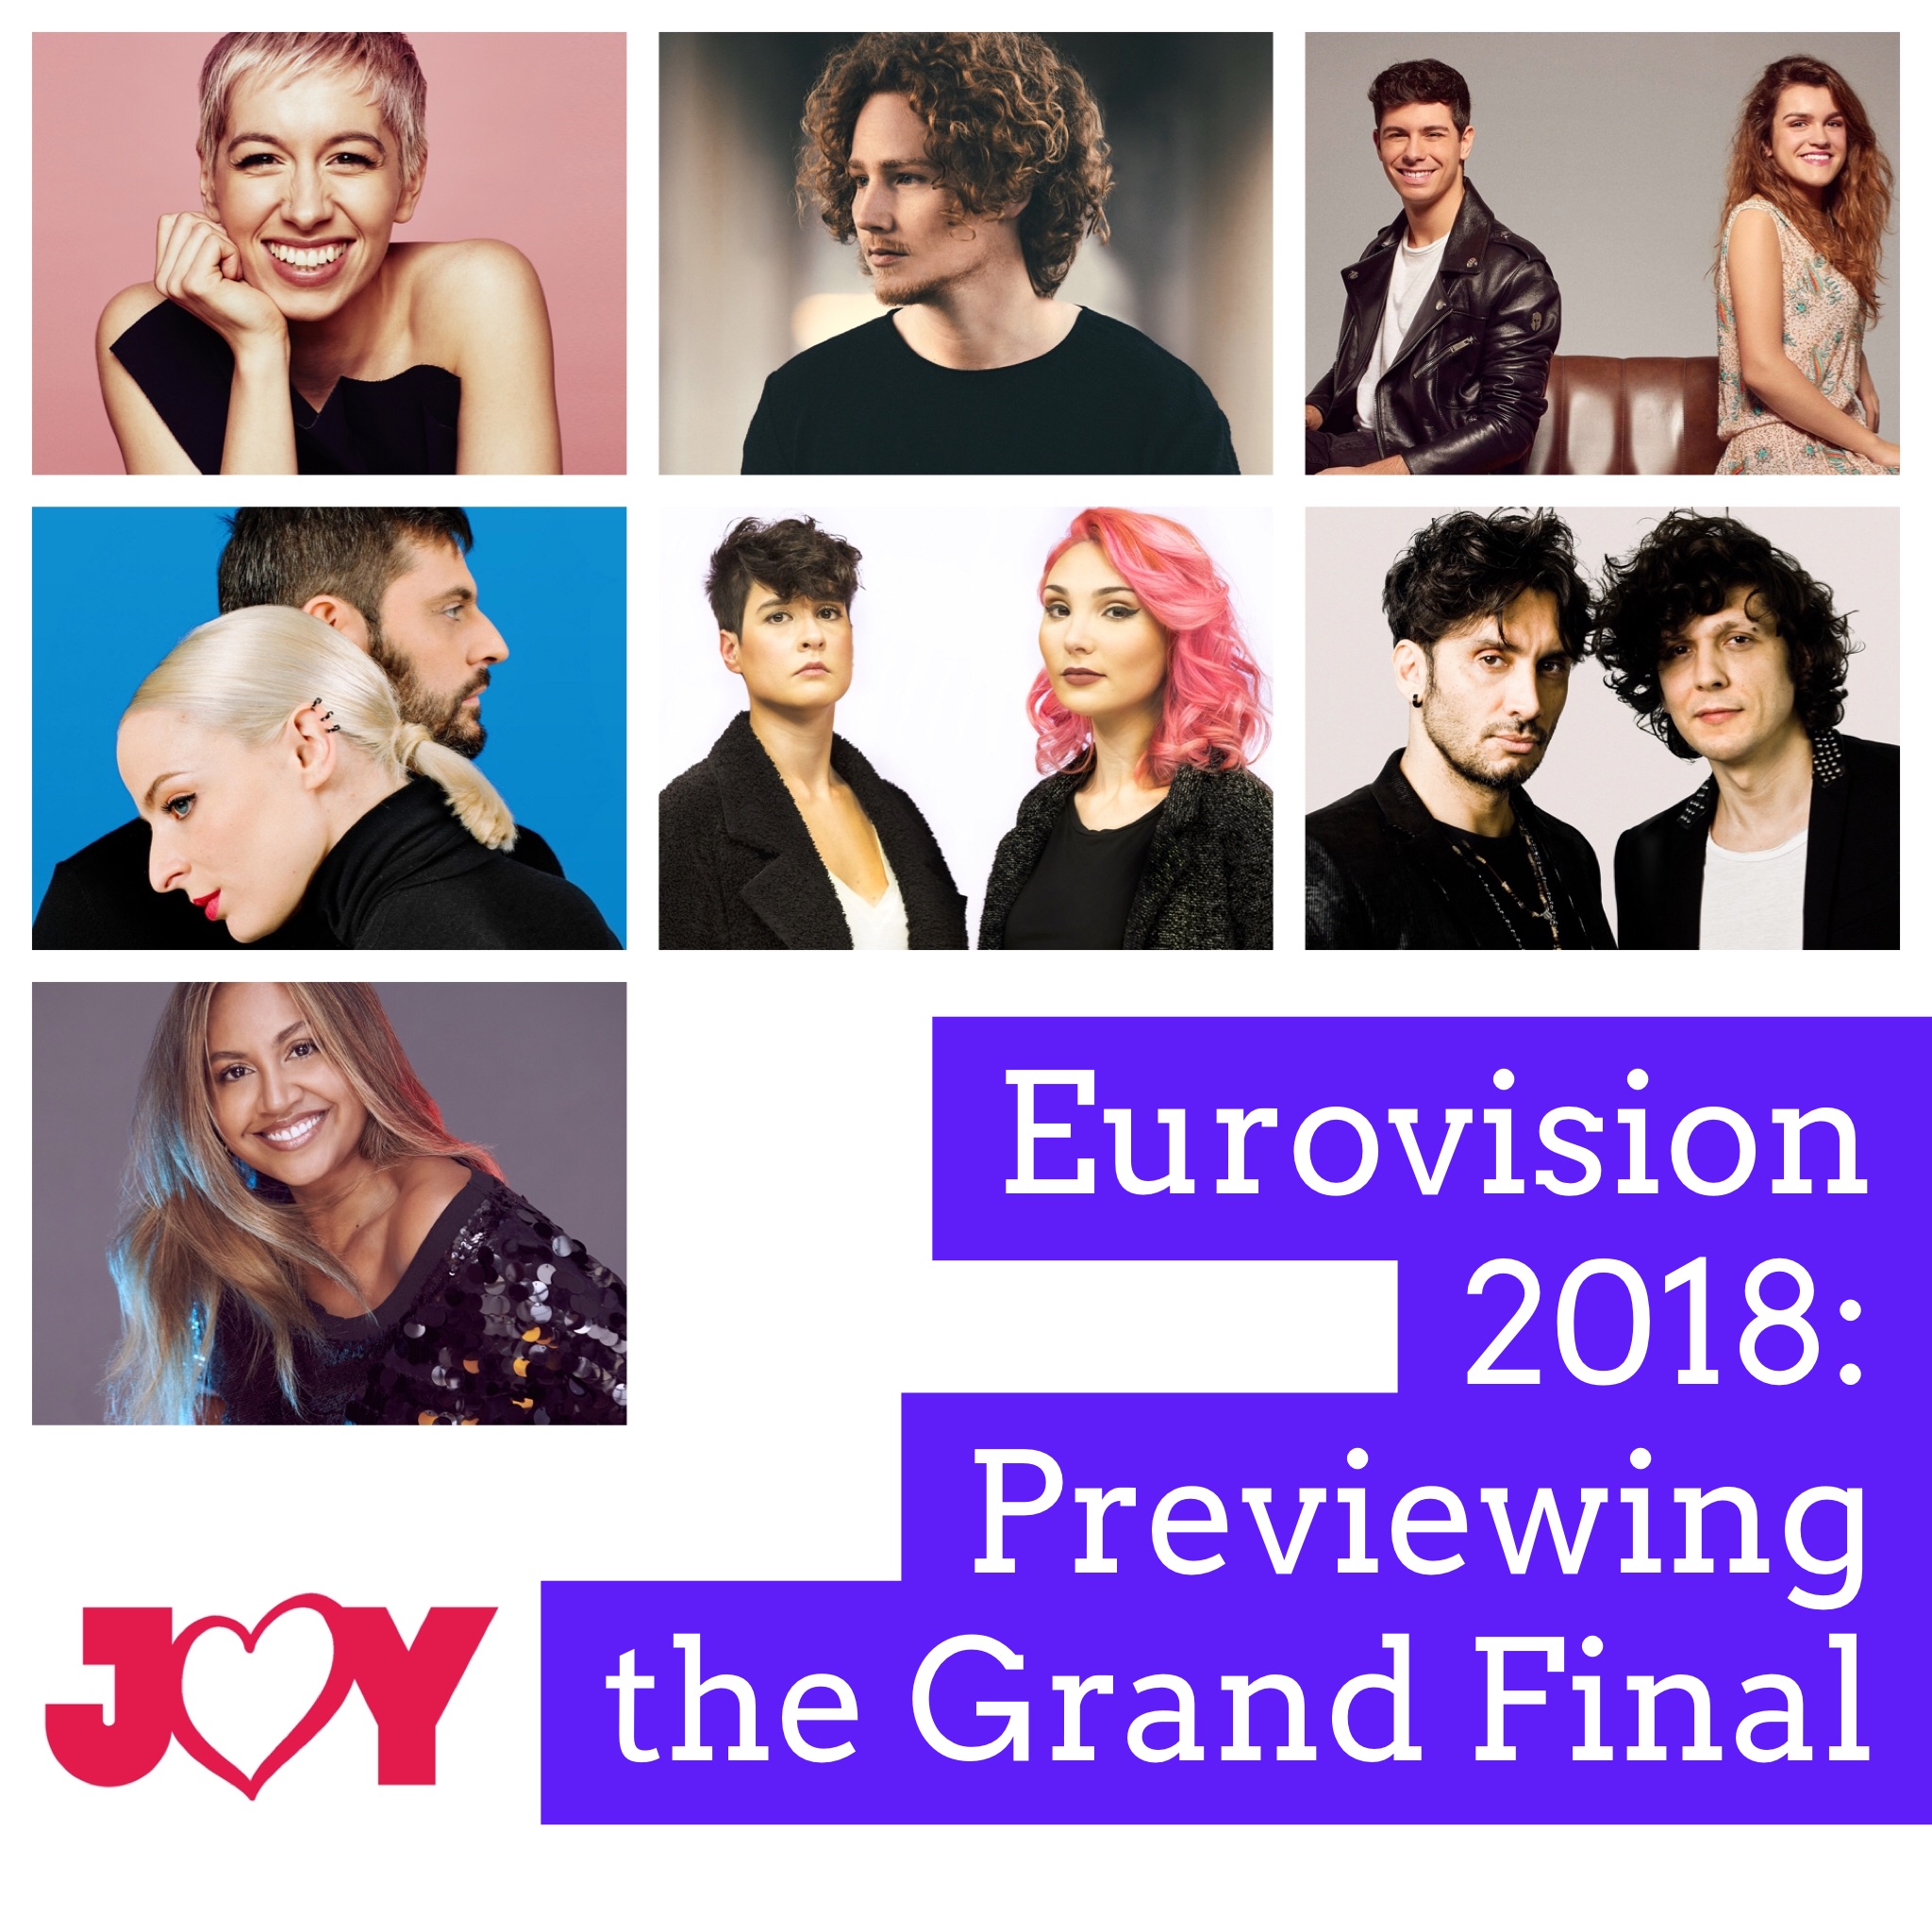 Eurovision 2018: Previewing the Grand Final